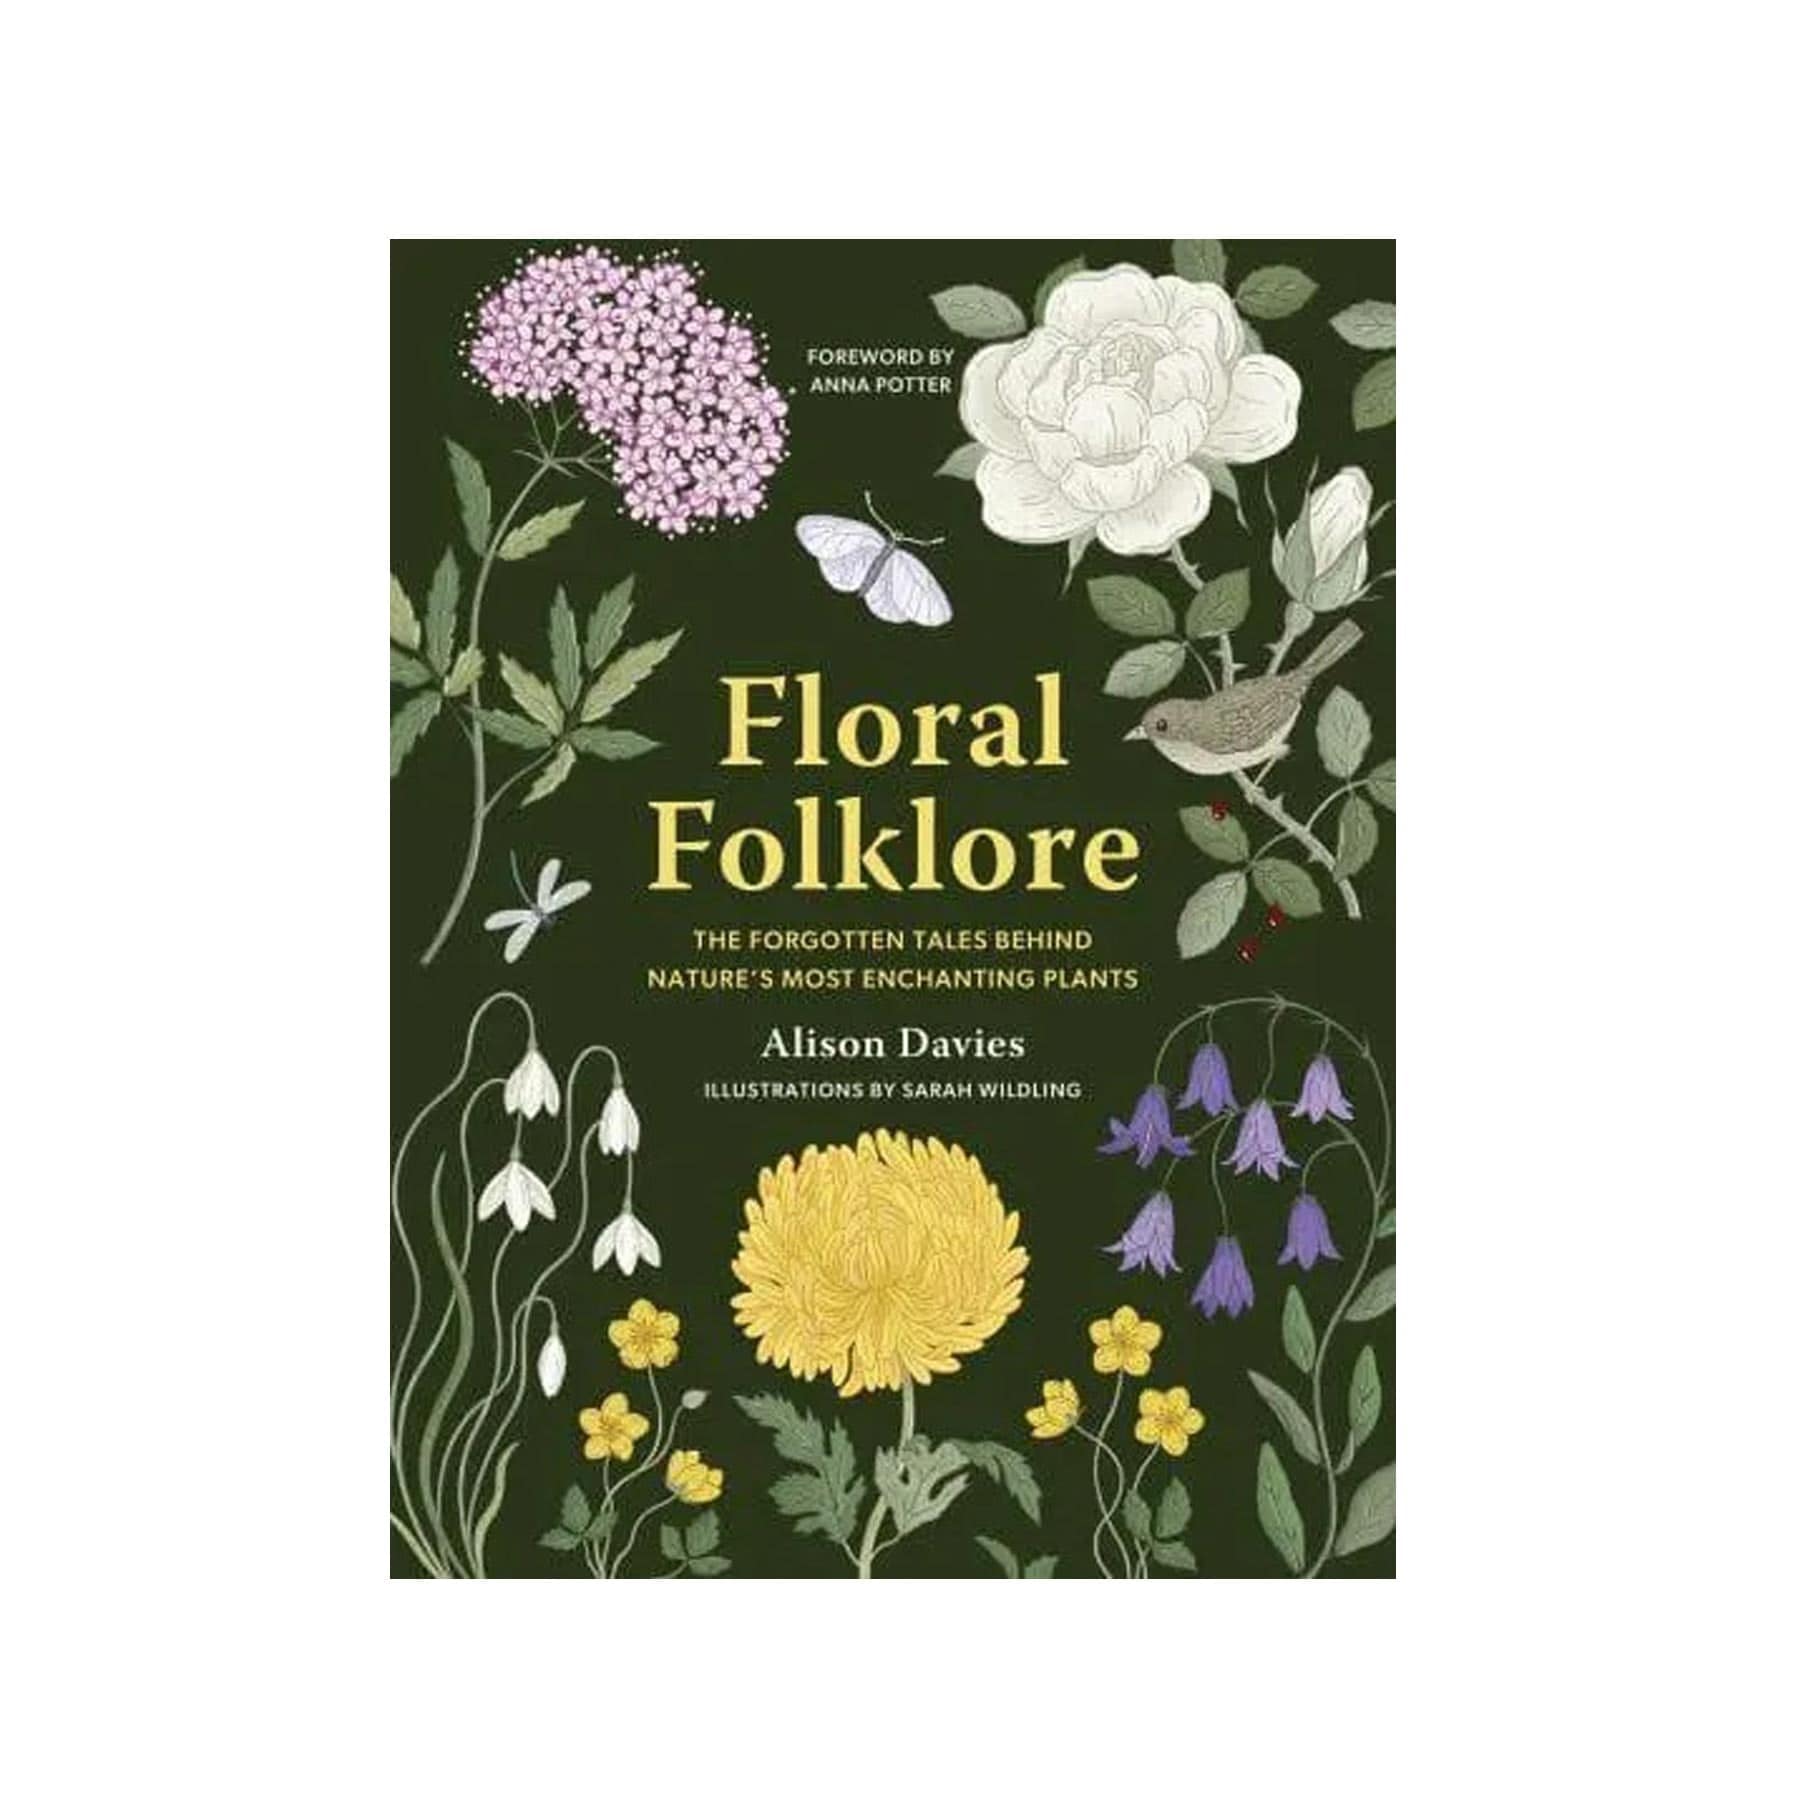 Floral folklore: the forgotten tales behind nature’s most enchanting plants